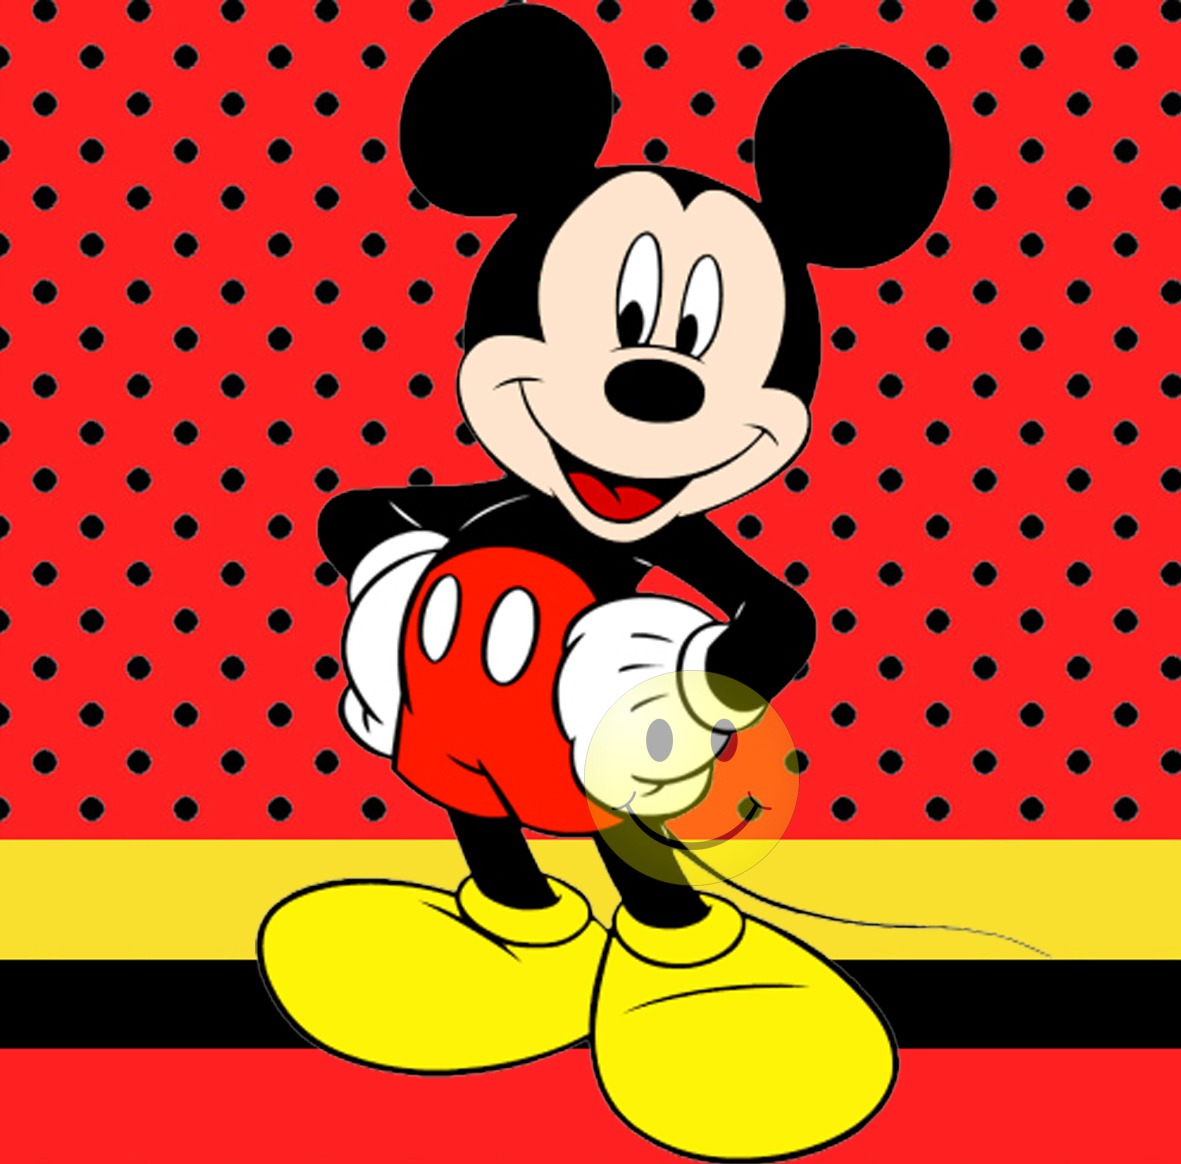 Mickey Mouse Cartoon Wallpaper HD For Mac | Cartoons Images